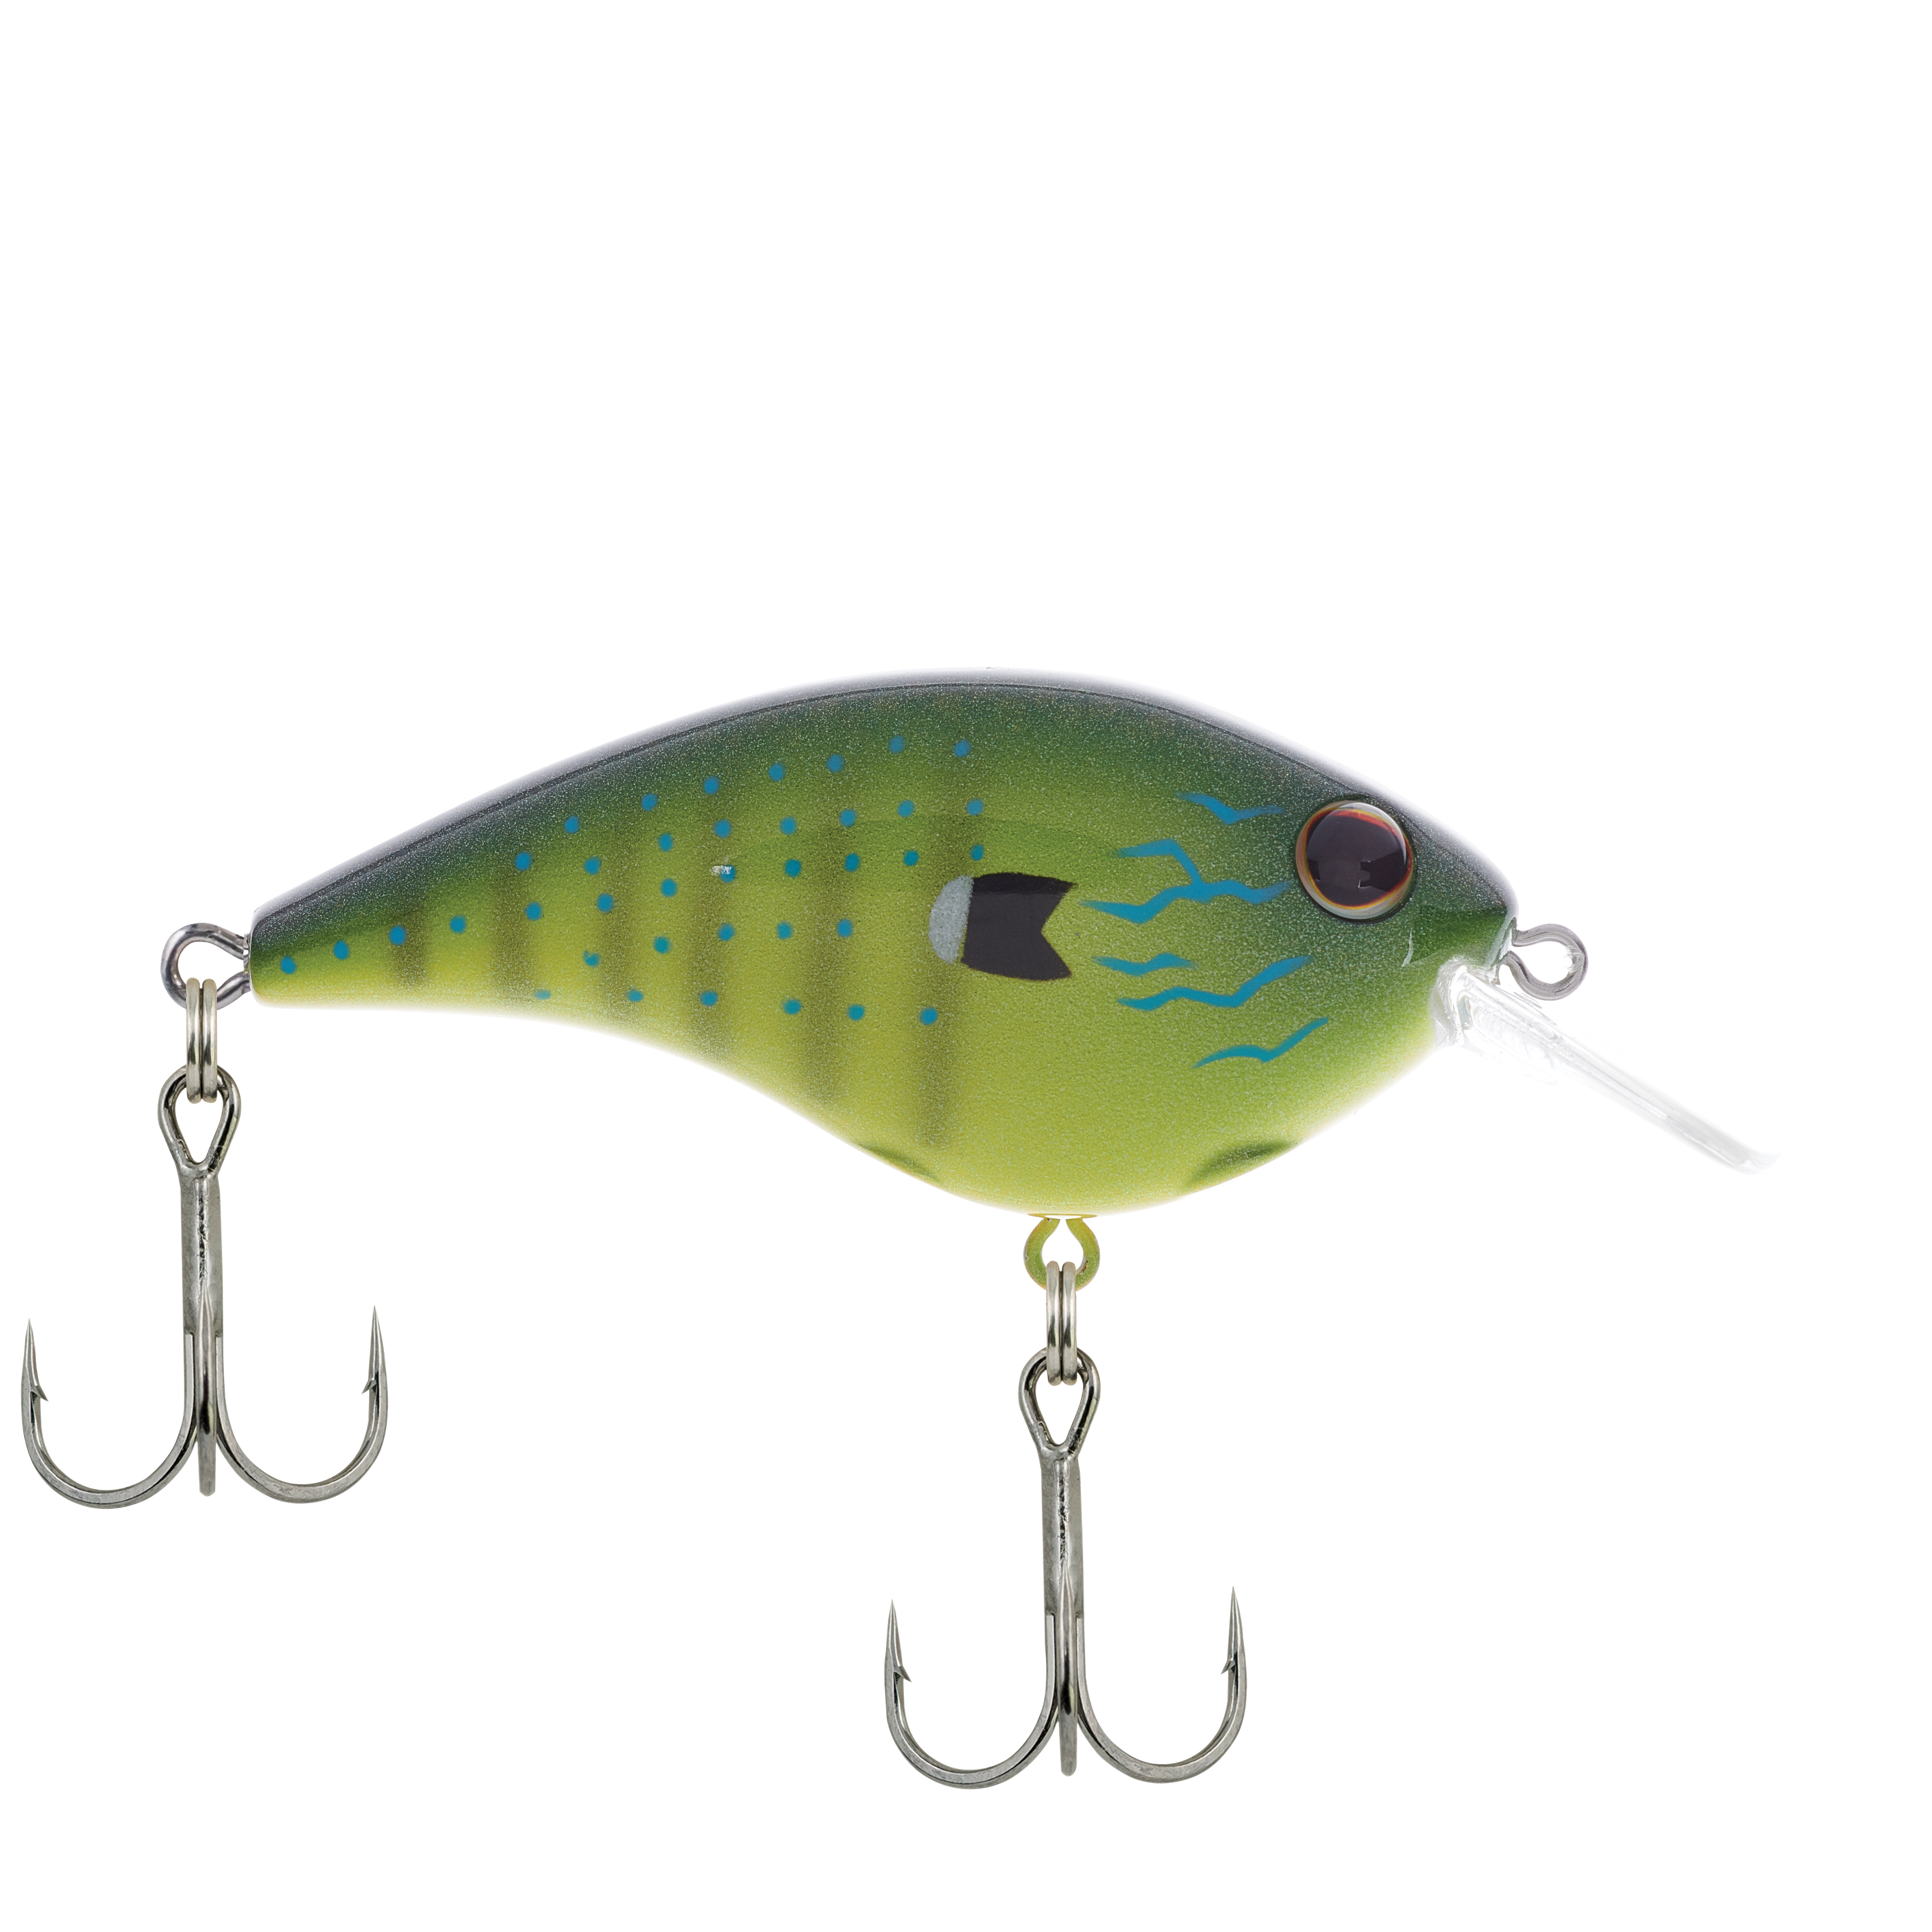 Berkley Frittside Fishing Lure, Ghost Morning Dawn, 3/7 oz, 2 1/2in | 6  2/5cm Crankbaits, Classic Flat Side Profile Mimics Variety of Species and